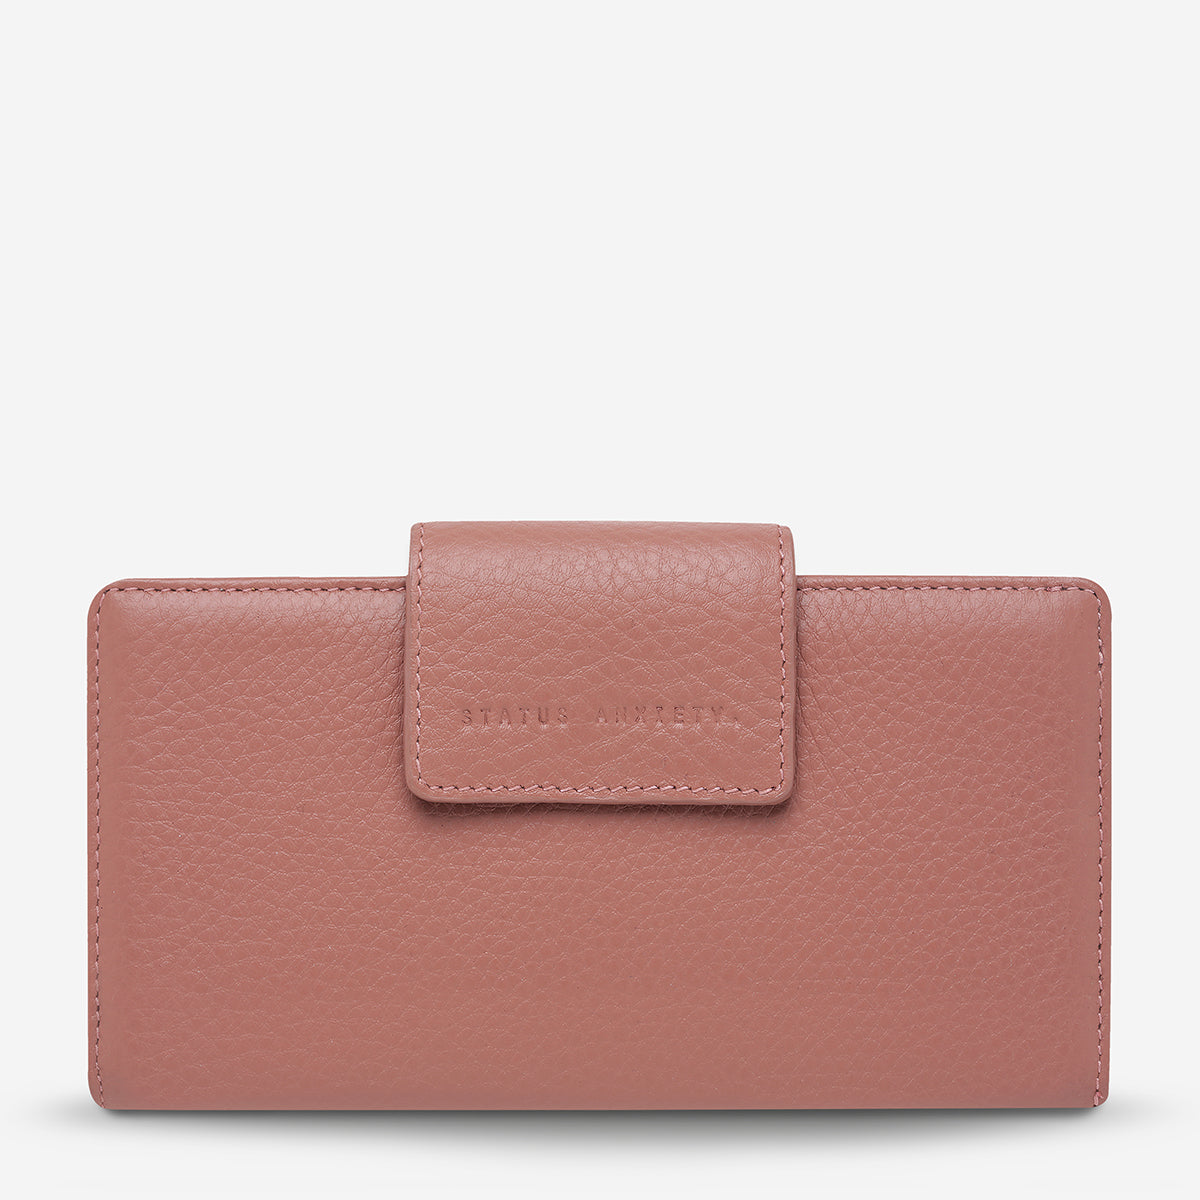 status-anxiety-wallet-ruins-dusty-rose-front_311cc459-93ca-4903-bab2-69daf461955c.jpg